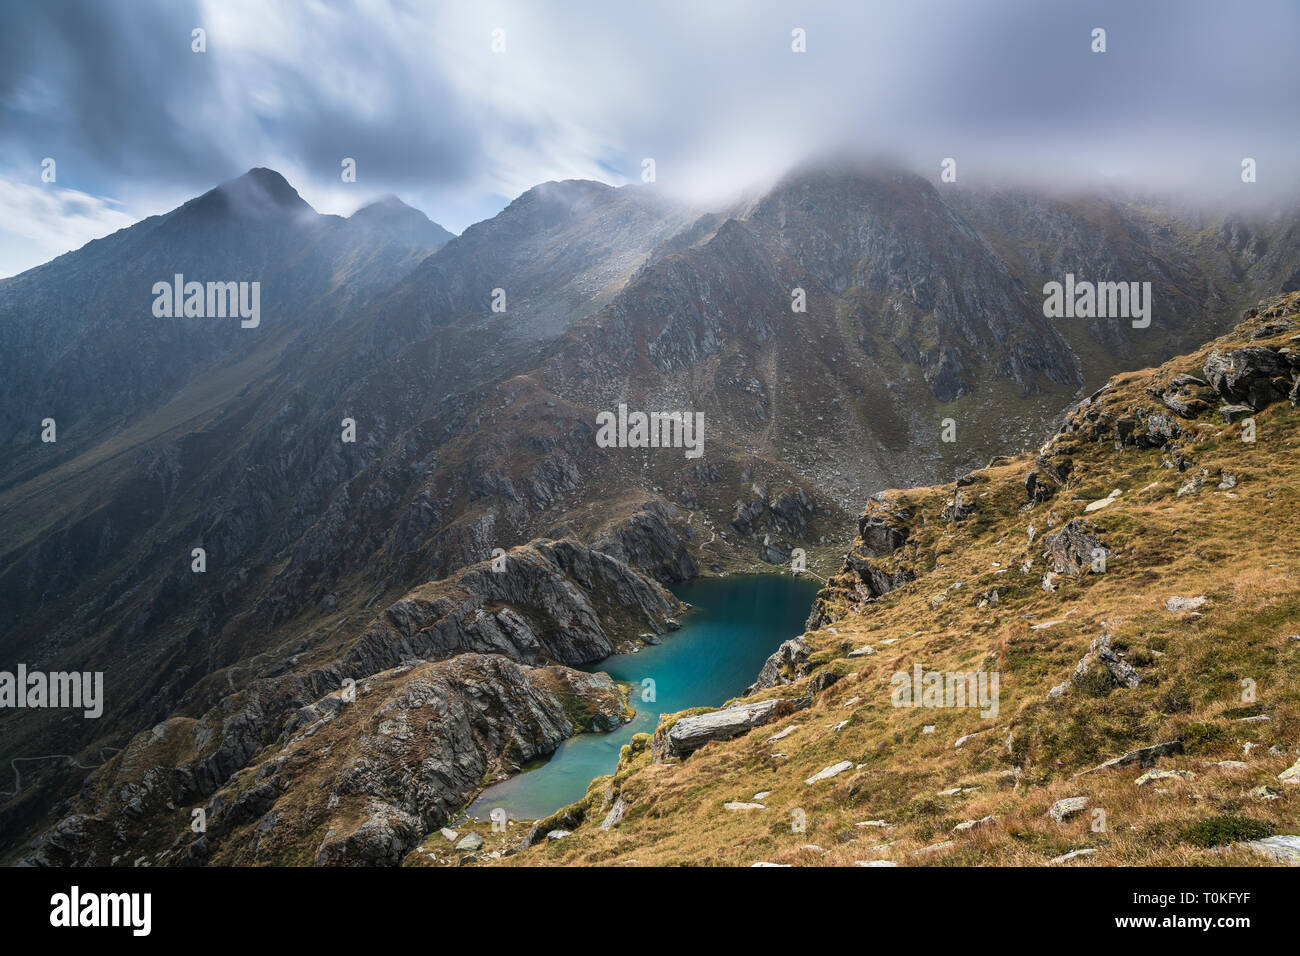 Hike to Seefeldspitze, view to Seefeldsee, Valser Tal, Pfunderer Berge, South Tyrol, Italy Stock Photo